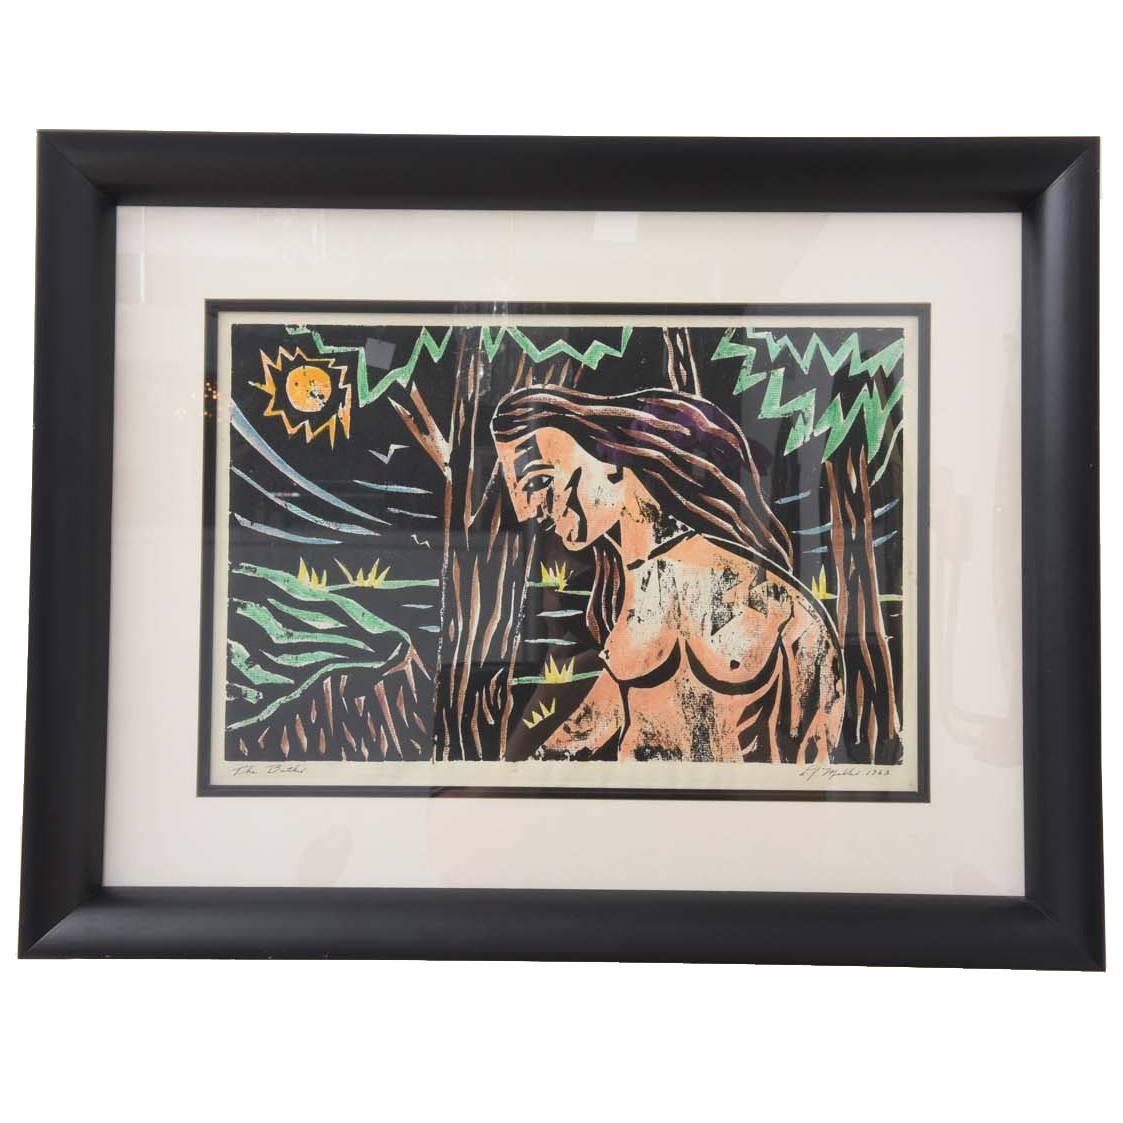 Mid-Century Woodblock Print, "The Bather" by L. J. Miller, 1963